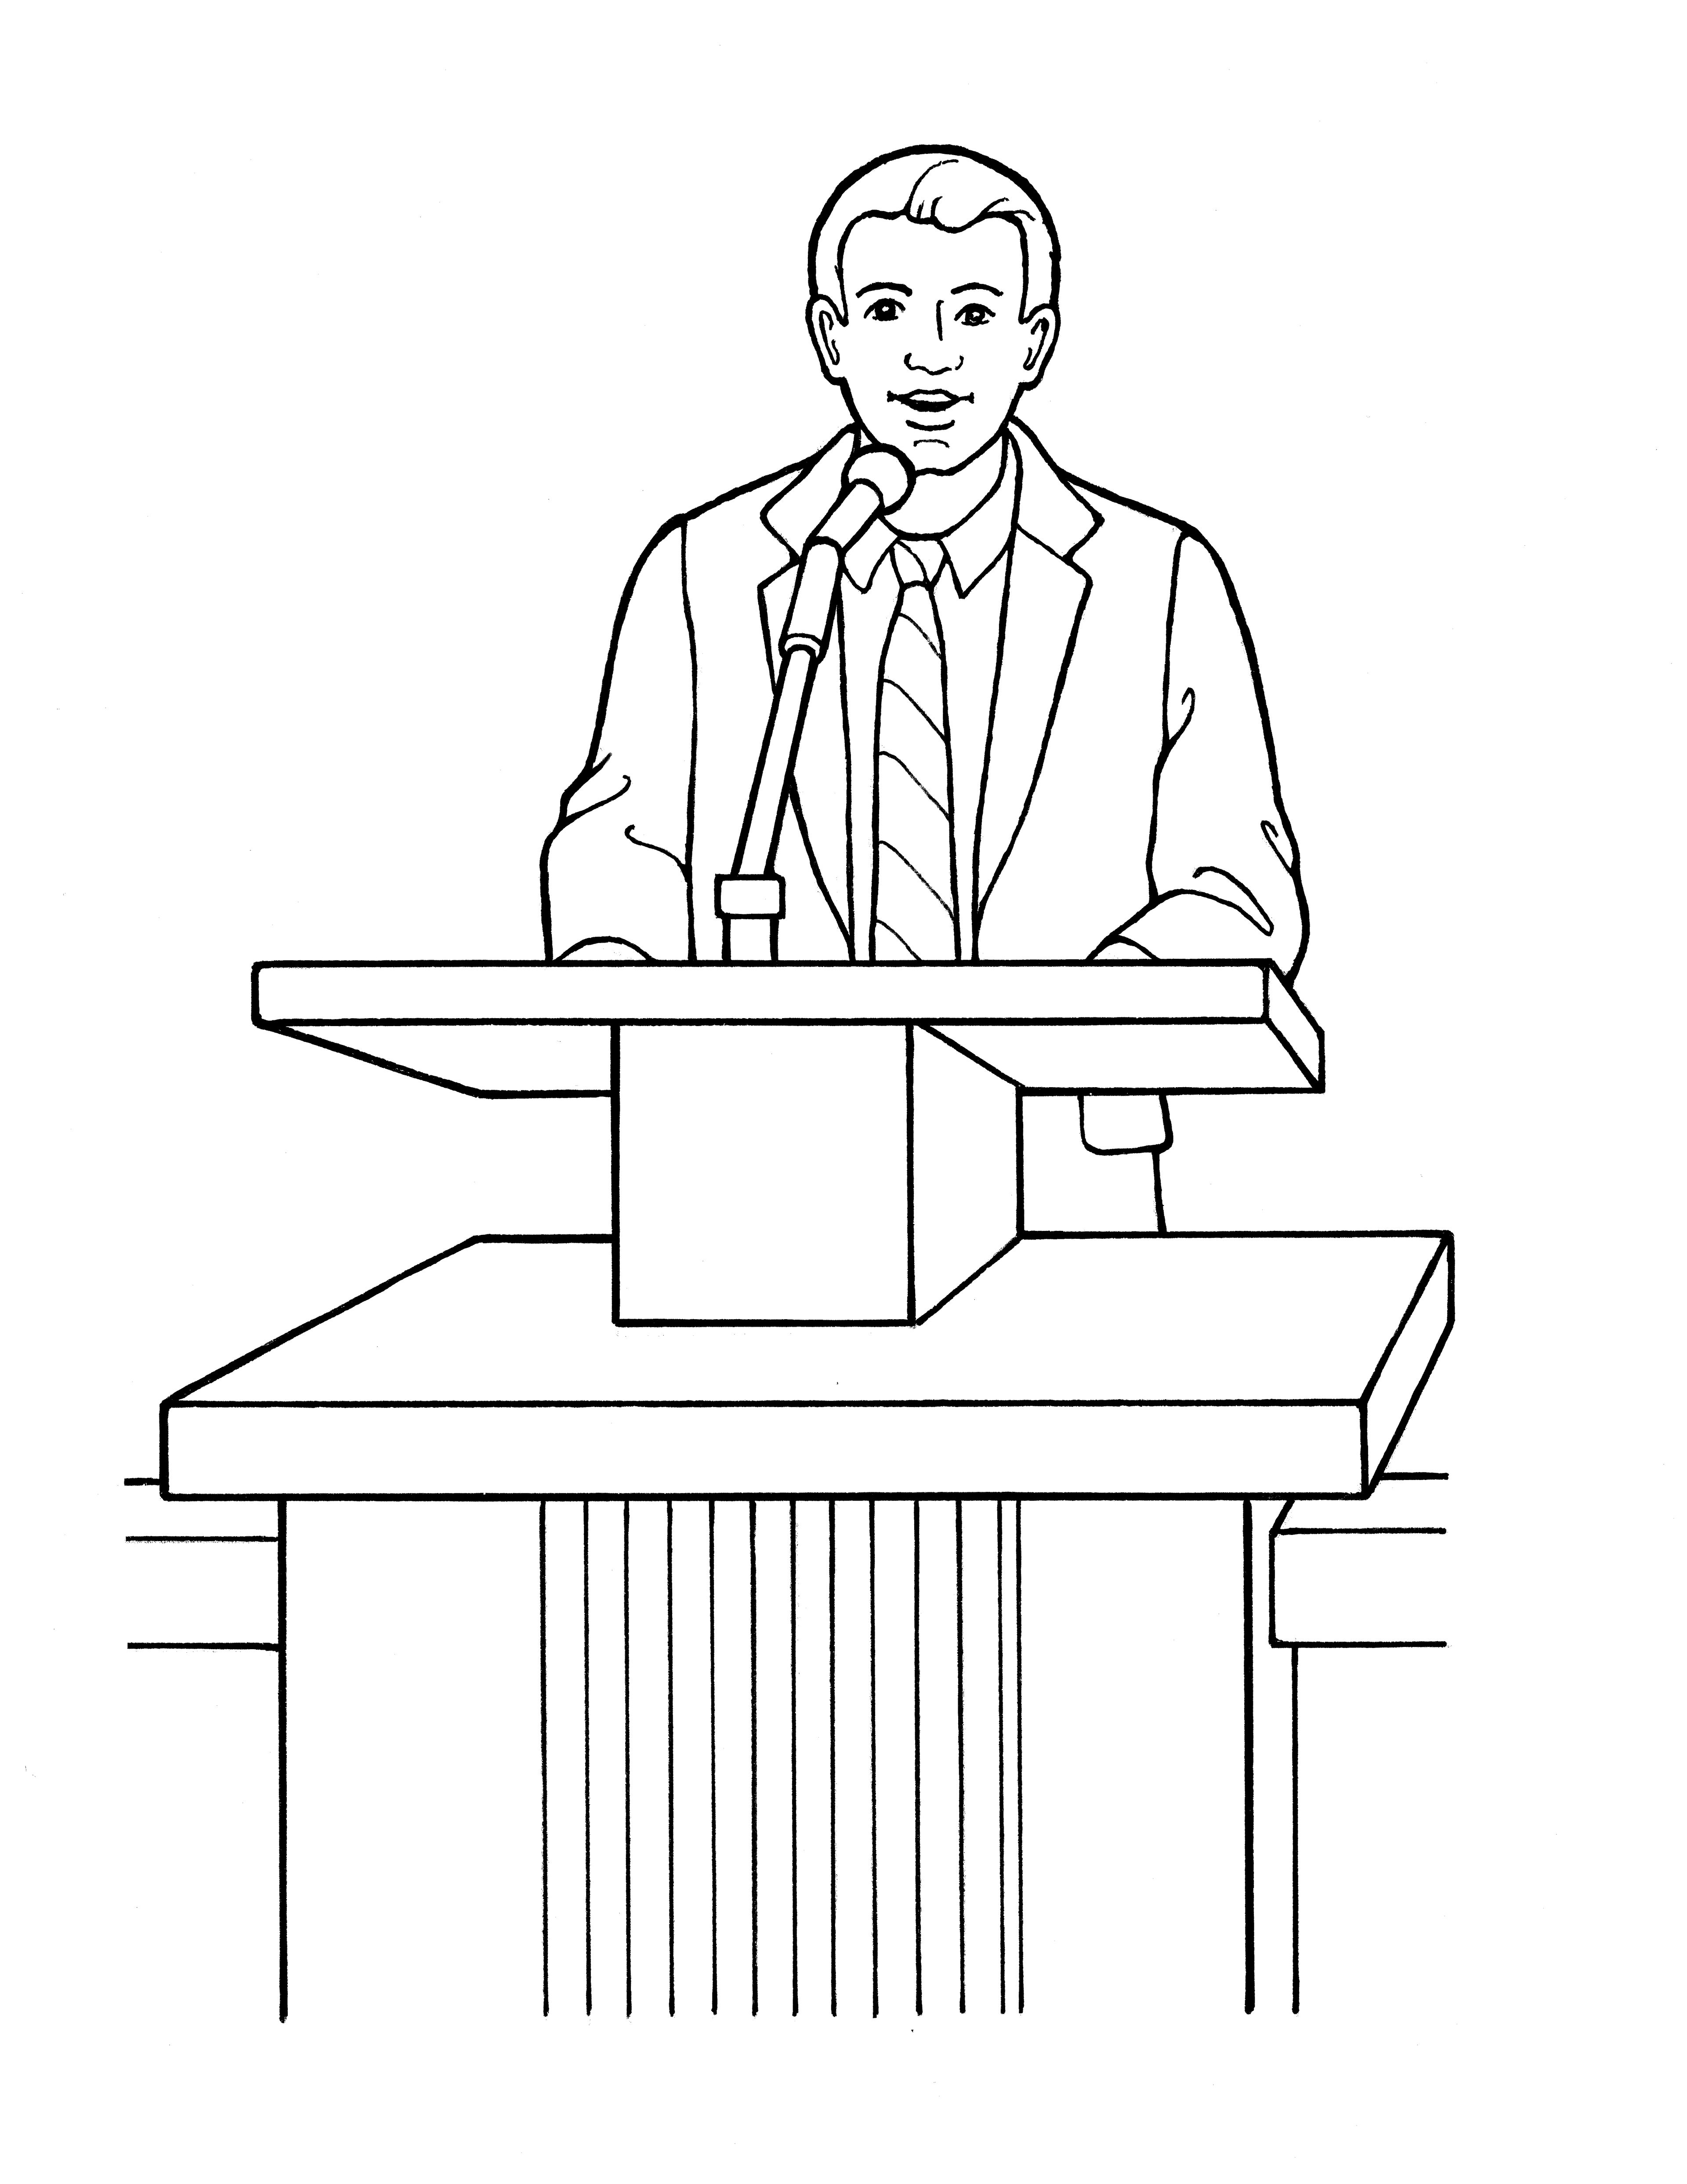 An illustration of a Bishop speaking at church.